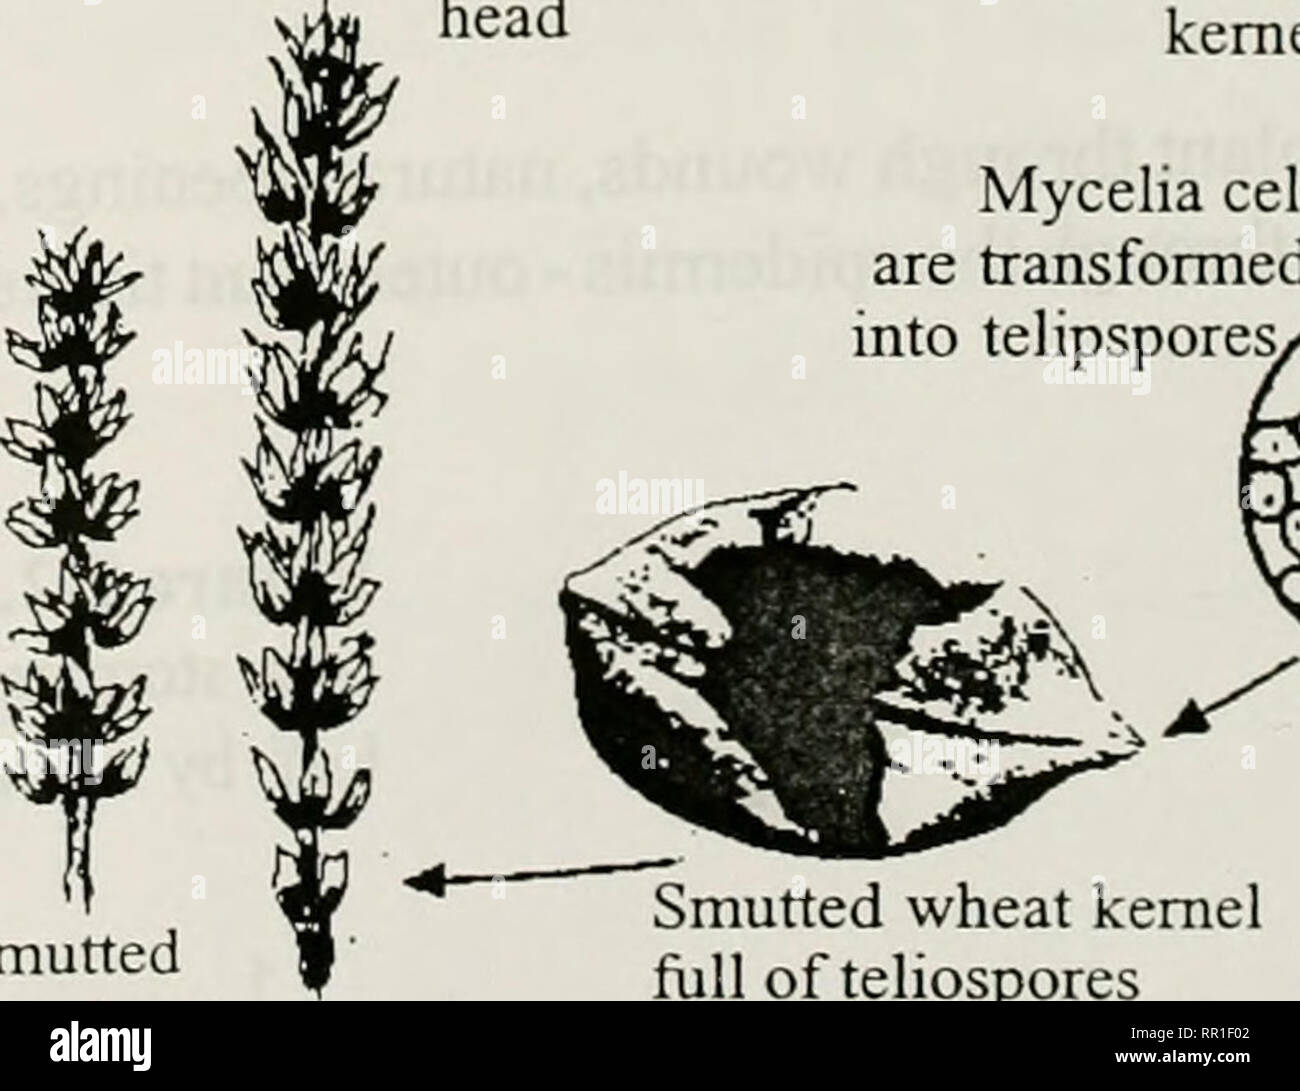 . Agricultural plant pest control : a study manual for commercial and governmental pesticide applicators . Weeds; Pests. Uninucleate primary sporidia y Basidium Germinating teliospore Zygote Teliospores on prminating wheat kernel Smutted kernels break upon harvest and contaminate healthy wheat kernels Healthy wheat head w, /i' K.CII1C1 Hn ..'It C0# Intercellular mycelium Mycelium grows through spike and into wheat kernels Mycelium becomes intracellular in kernels Mycelia cells are transformed into telipspores Figure 1-4. Disease cycle of bunt smut of wheat.. Please note that these images are e Stock Photo